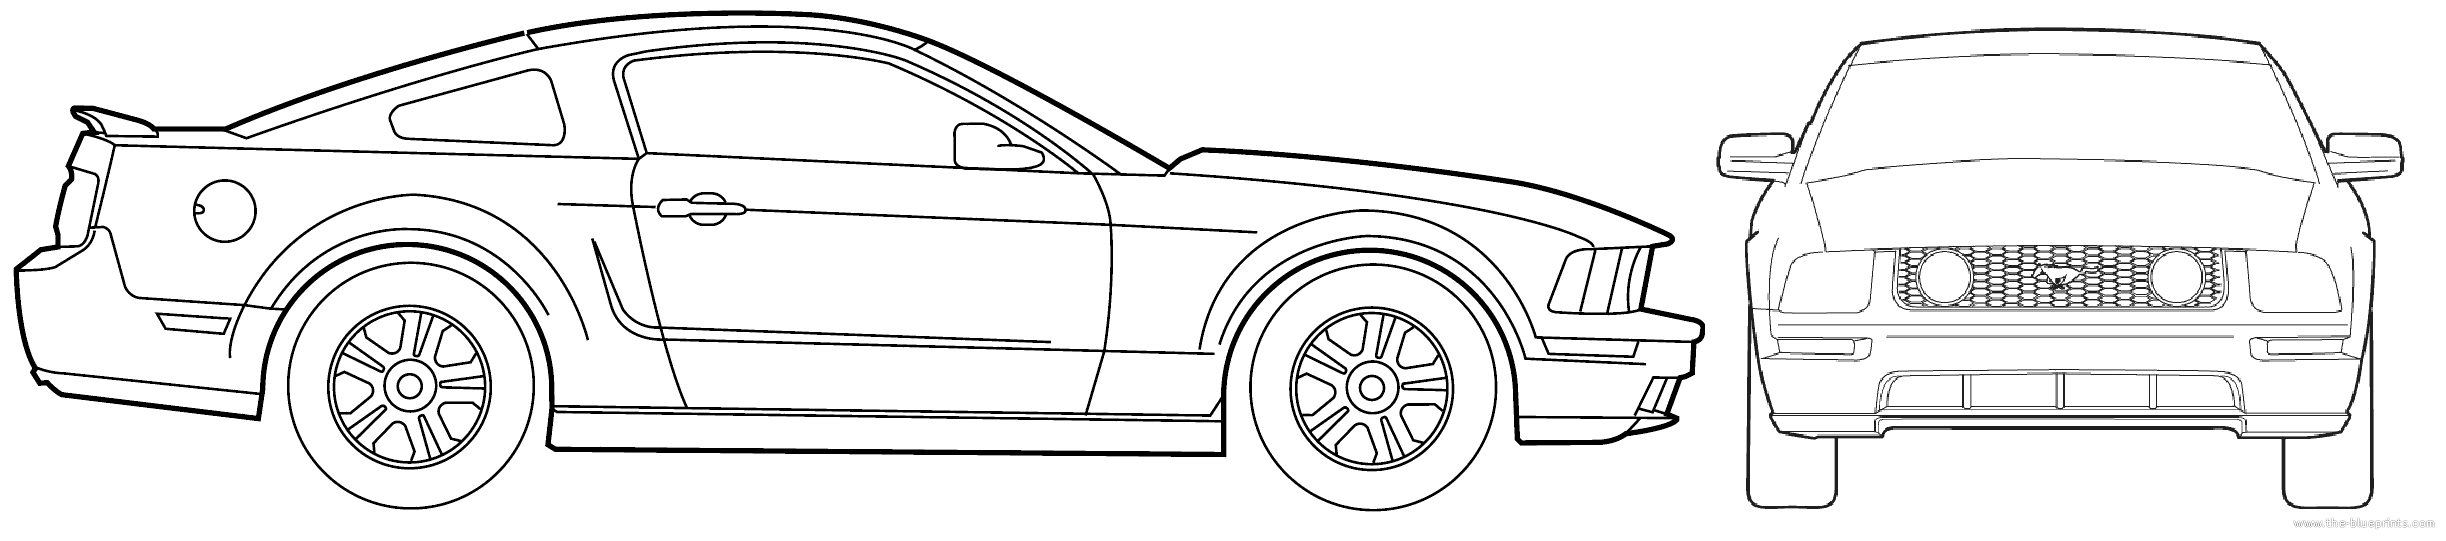 2005 Ford mustang blueprints